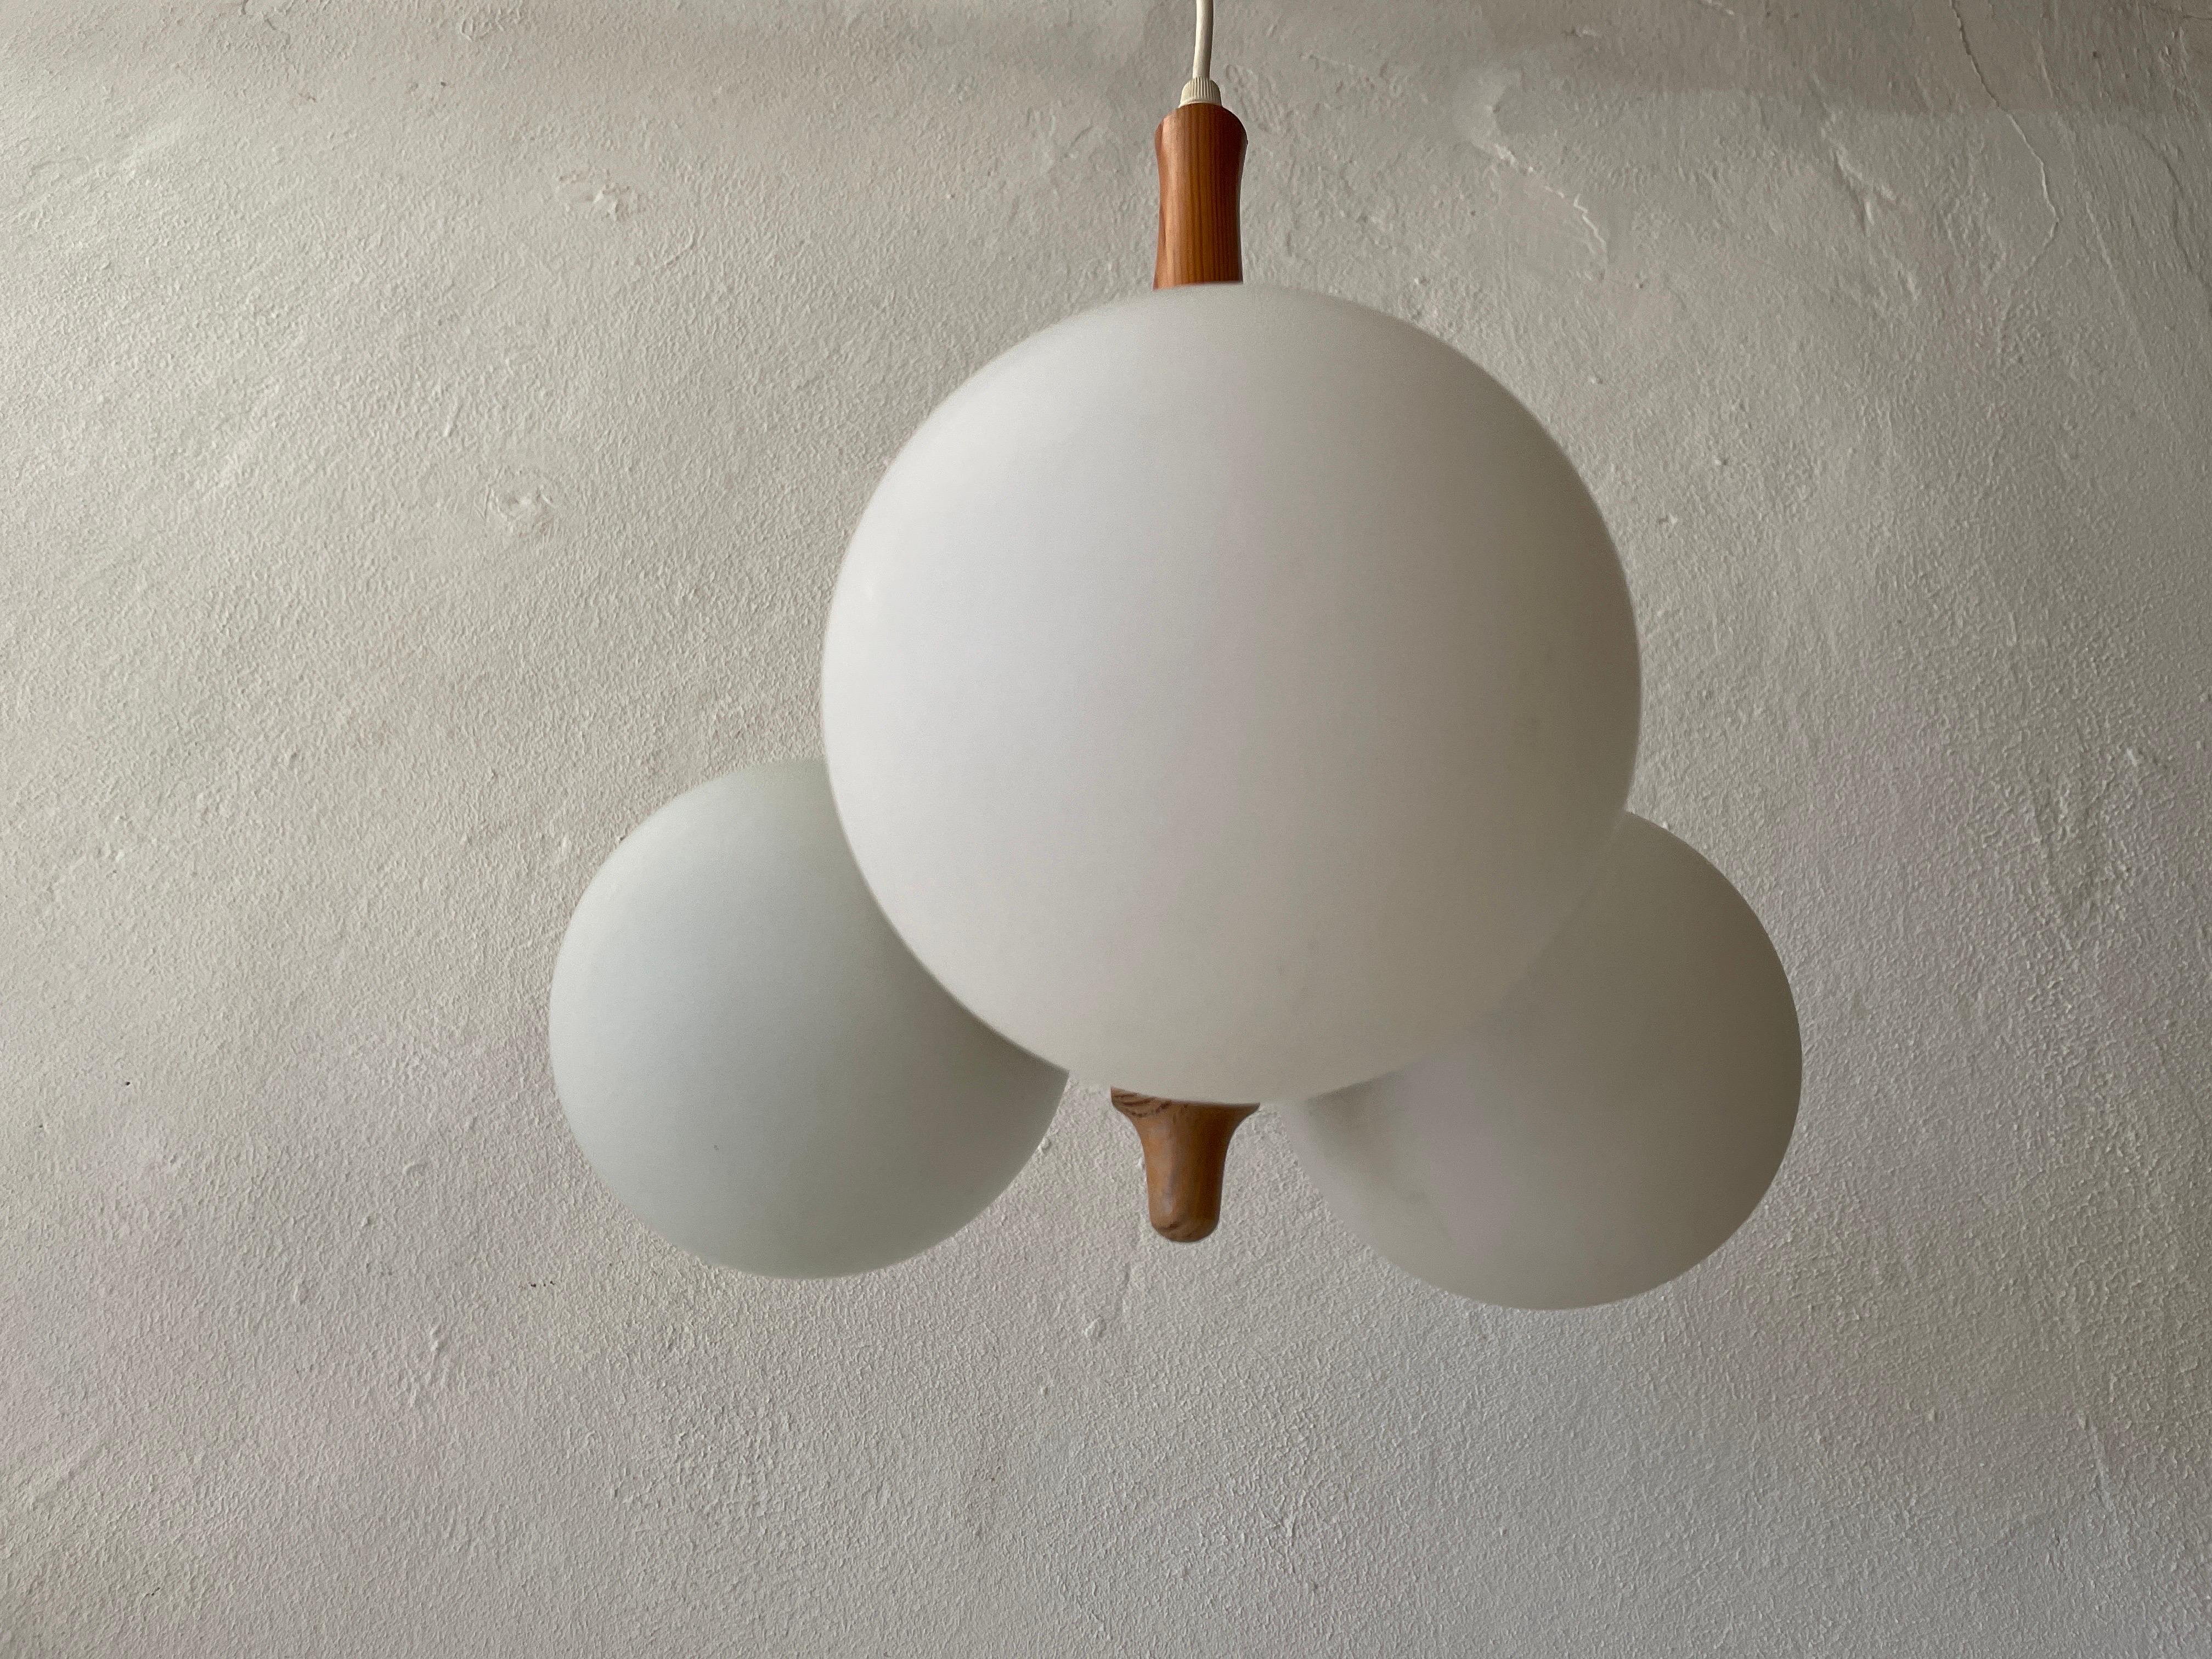 3 Opal Ball Glass and Wood Body Atomic Ceiling Lamp, 1970s, Germany In Good Condition For Sale In Hagenbach, DE